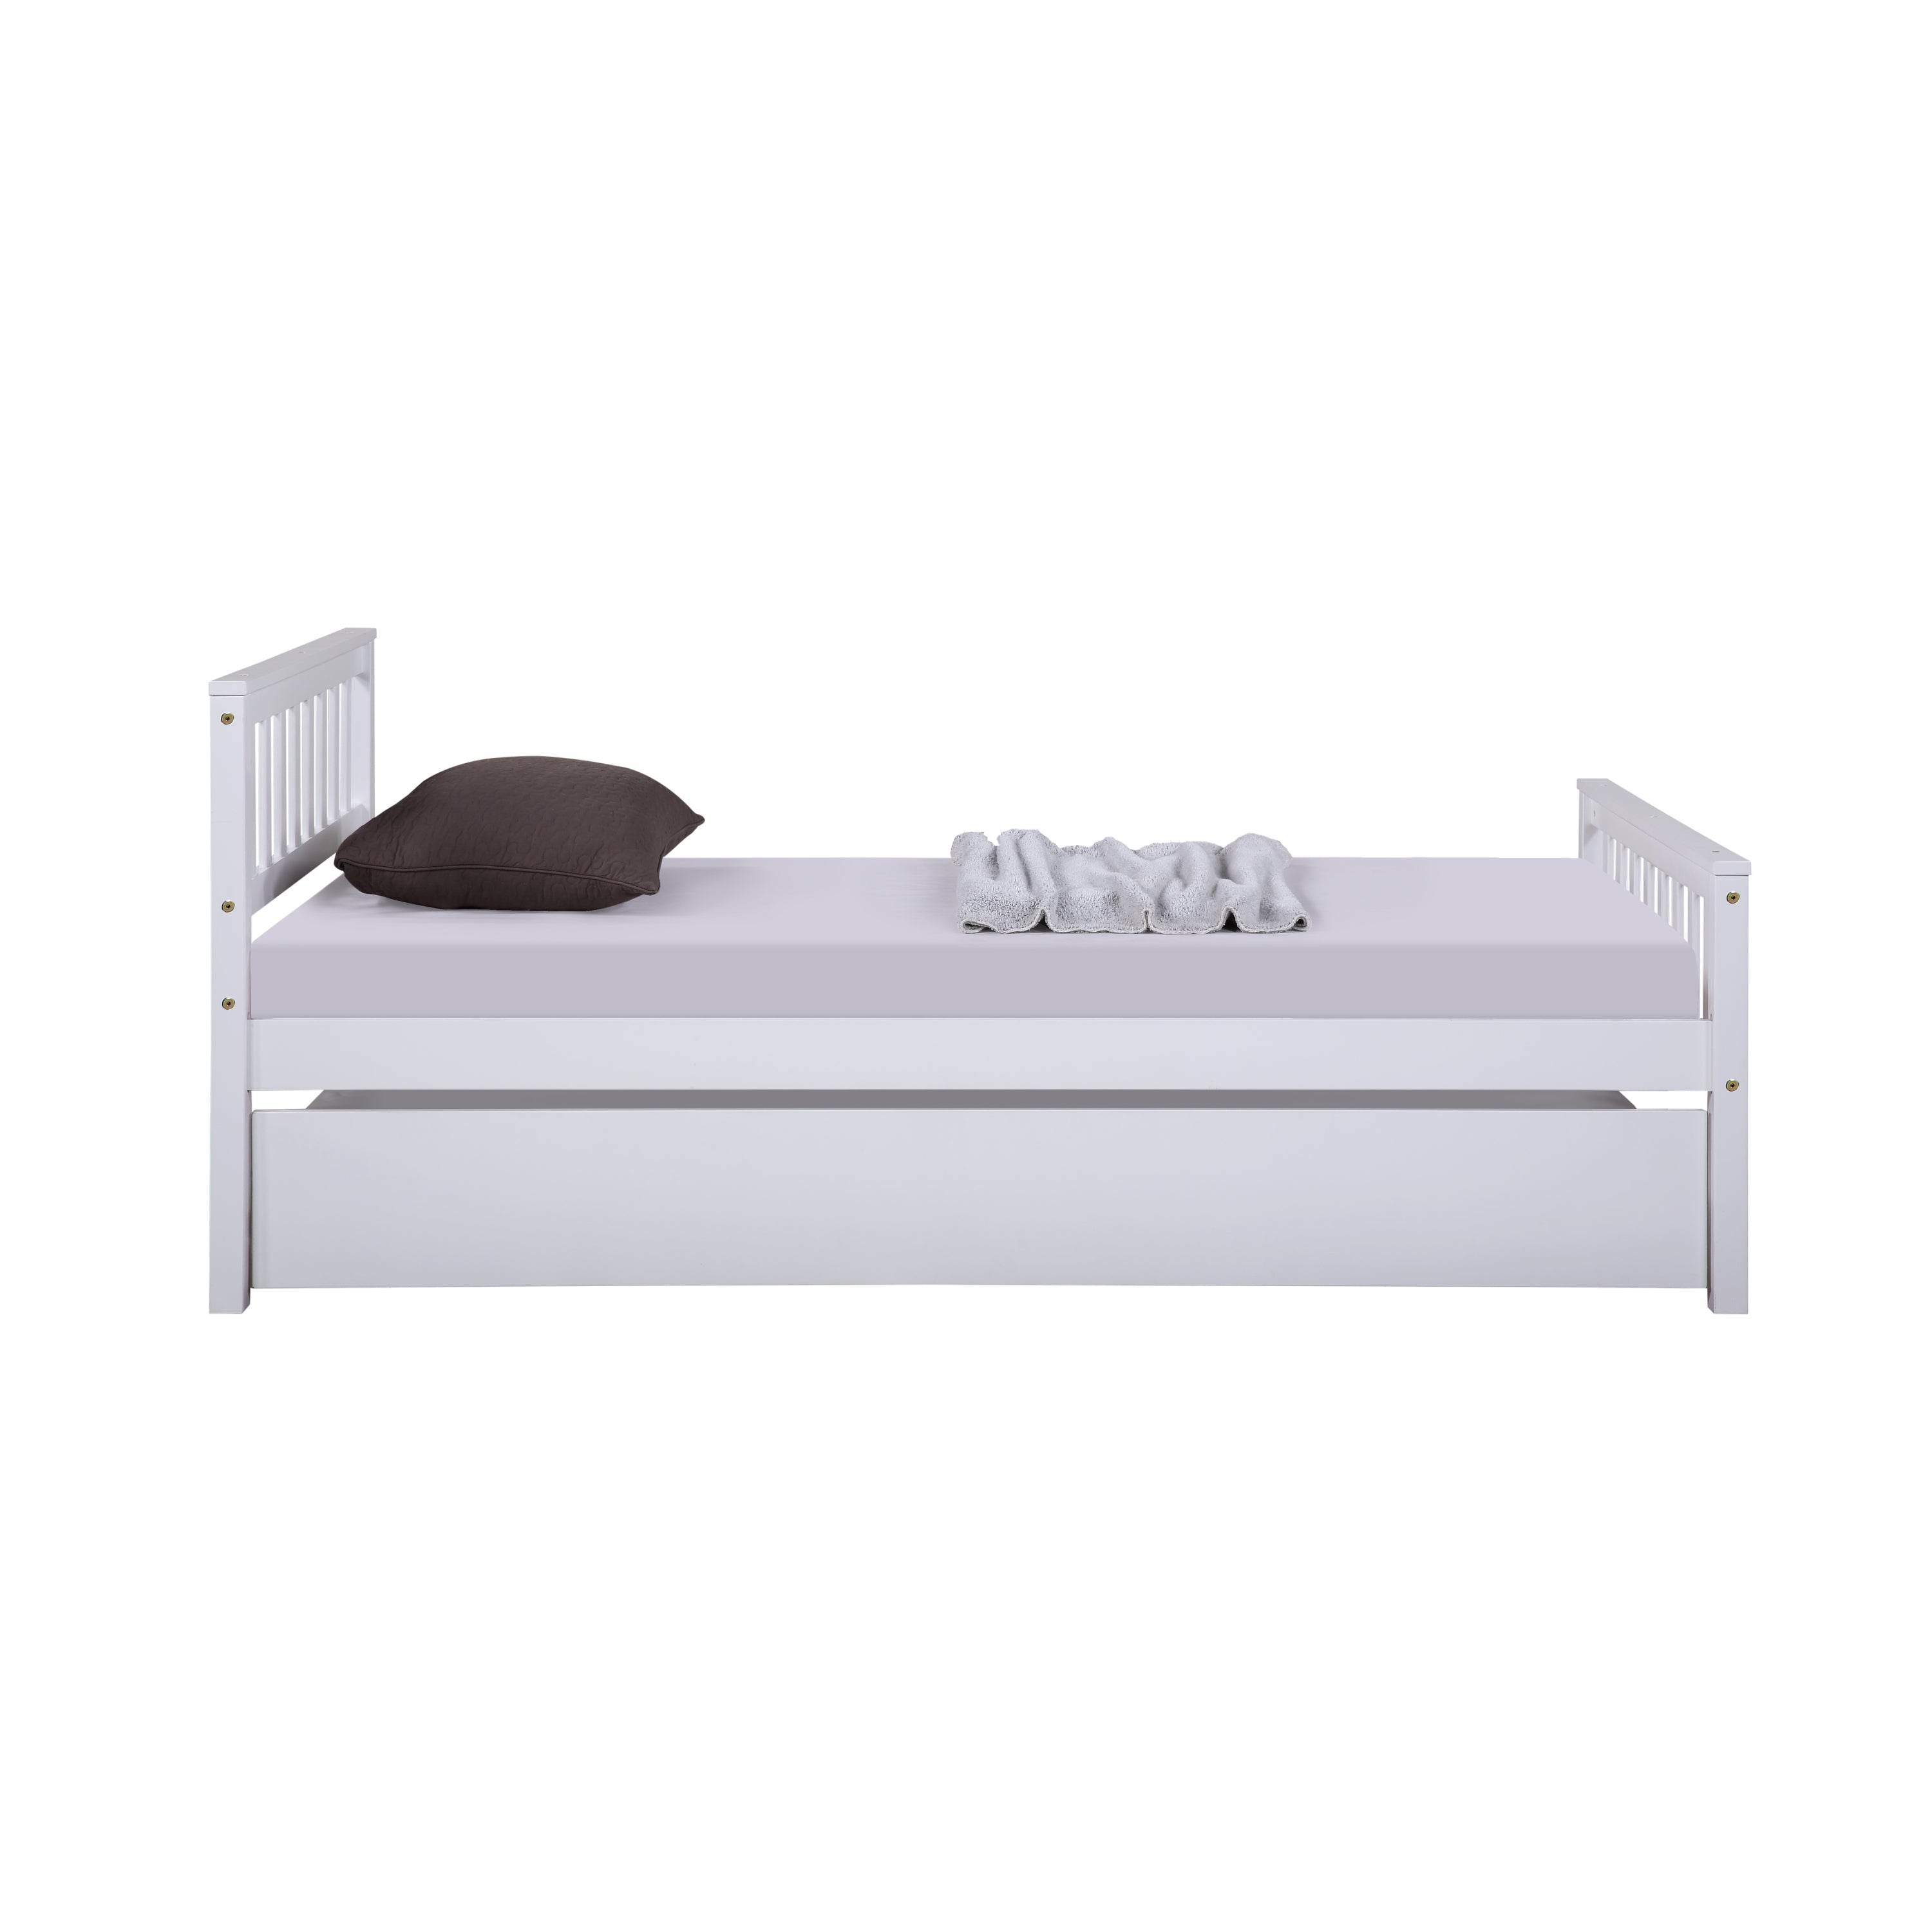 White Twin Bed Frame with Trundle and Headboard By: Alabama Beds